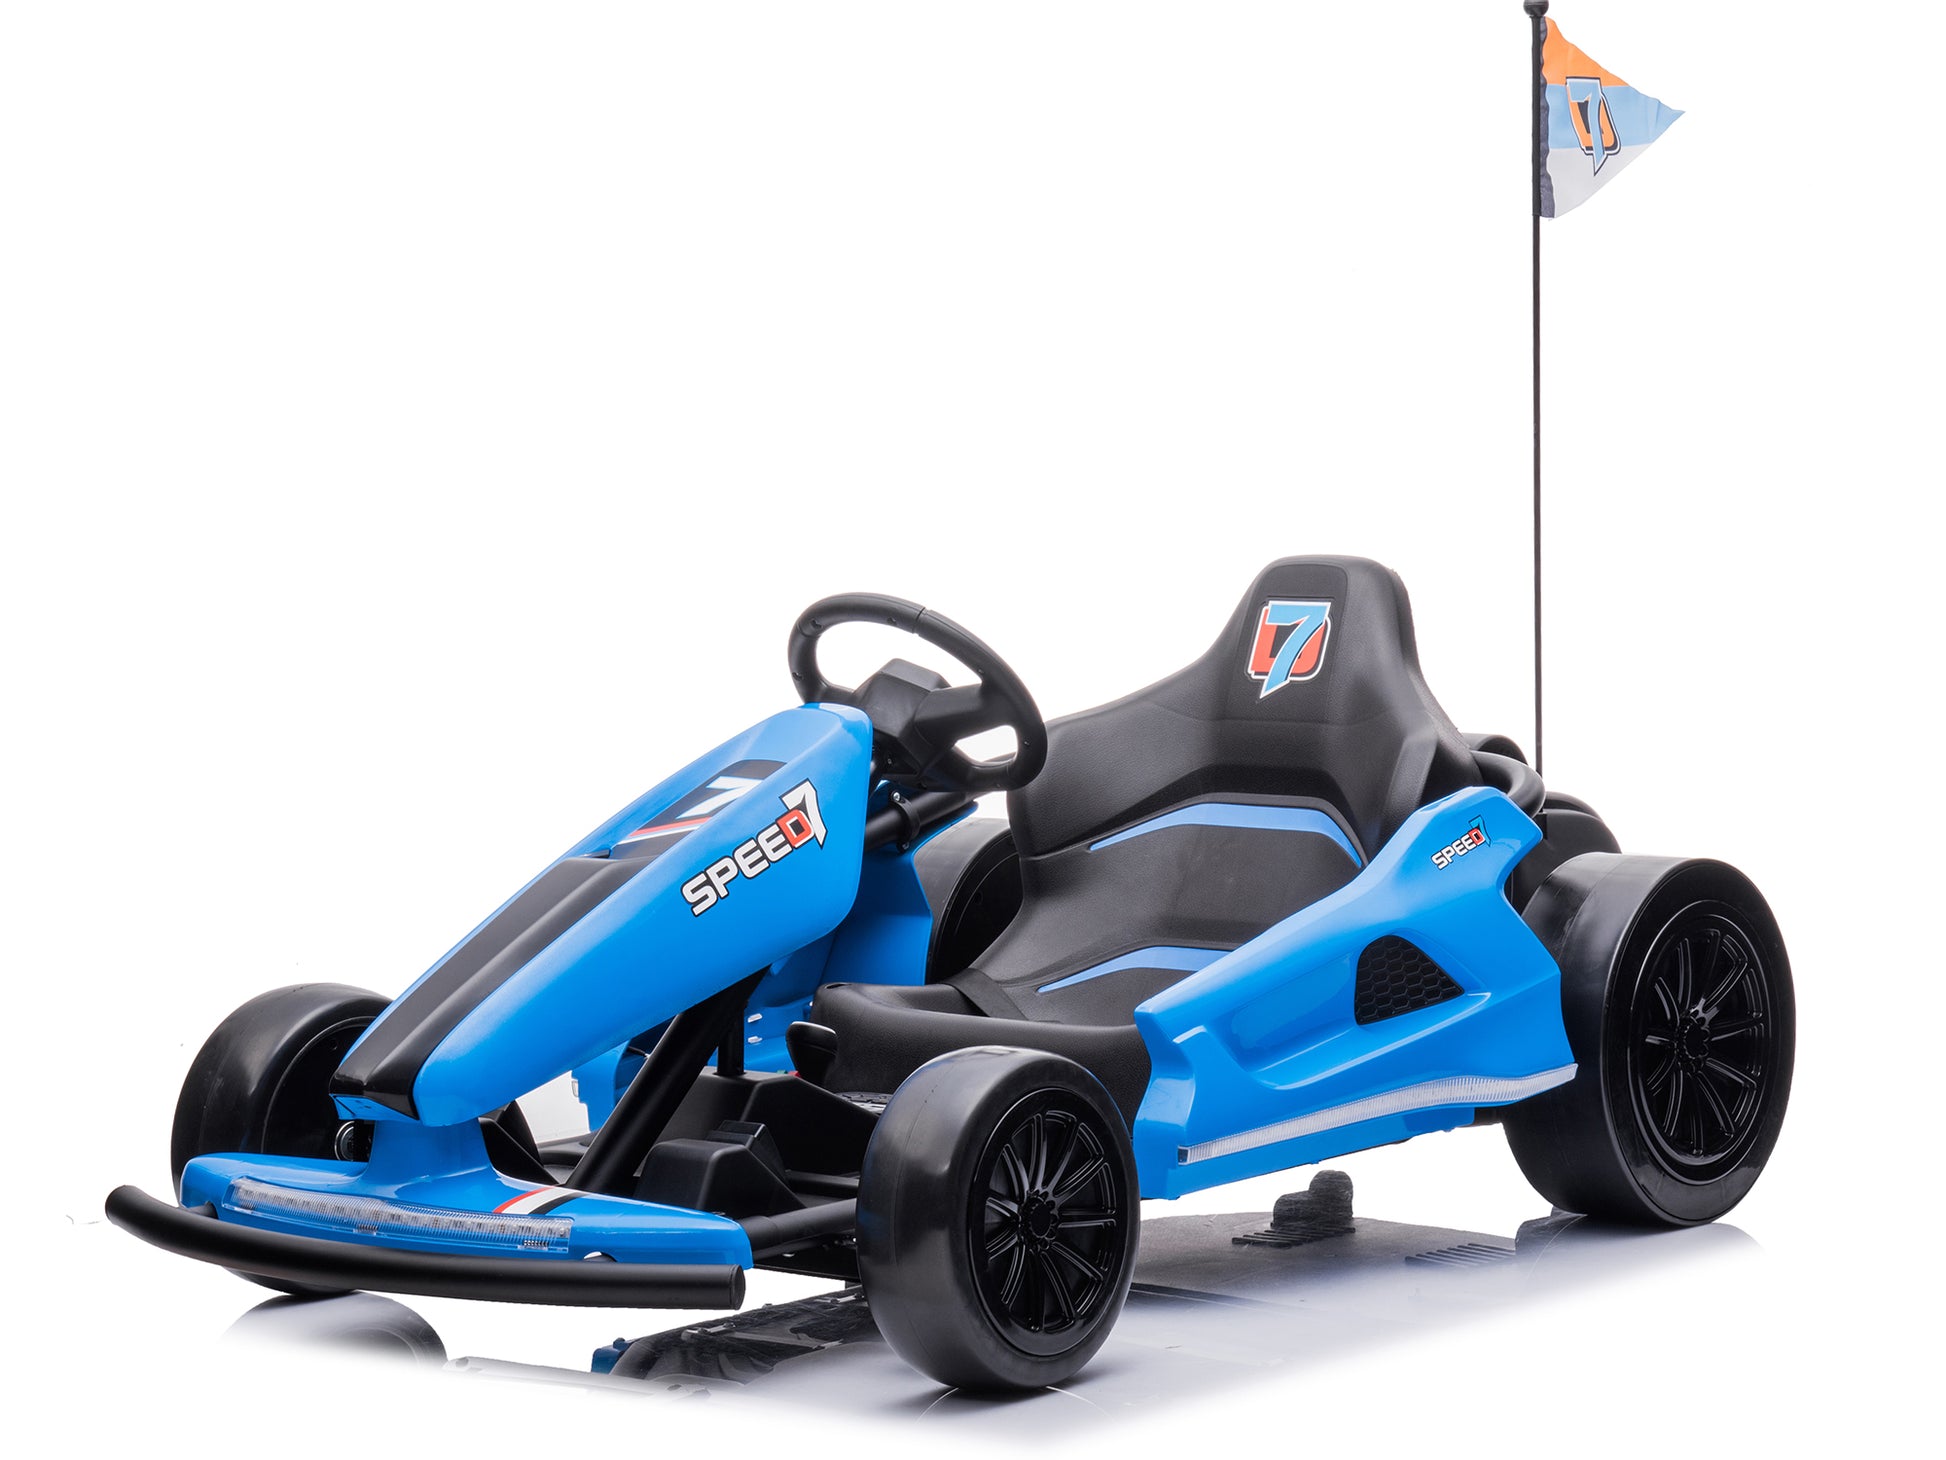  AOKOY Kids Electric Drift Car, 12V Battery Powered Ride On Toy  Car with Remote Control Ride On Sports Car Go Kart for Kids with Drift  Function 3 Speeds LED Headlights, Blue 